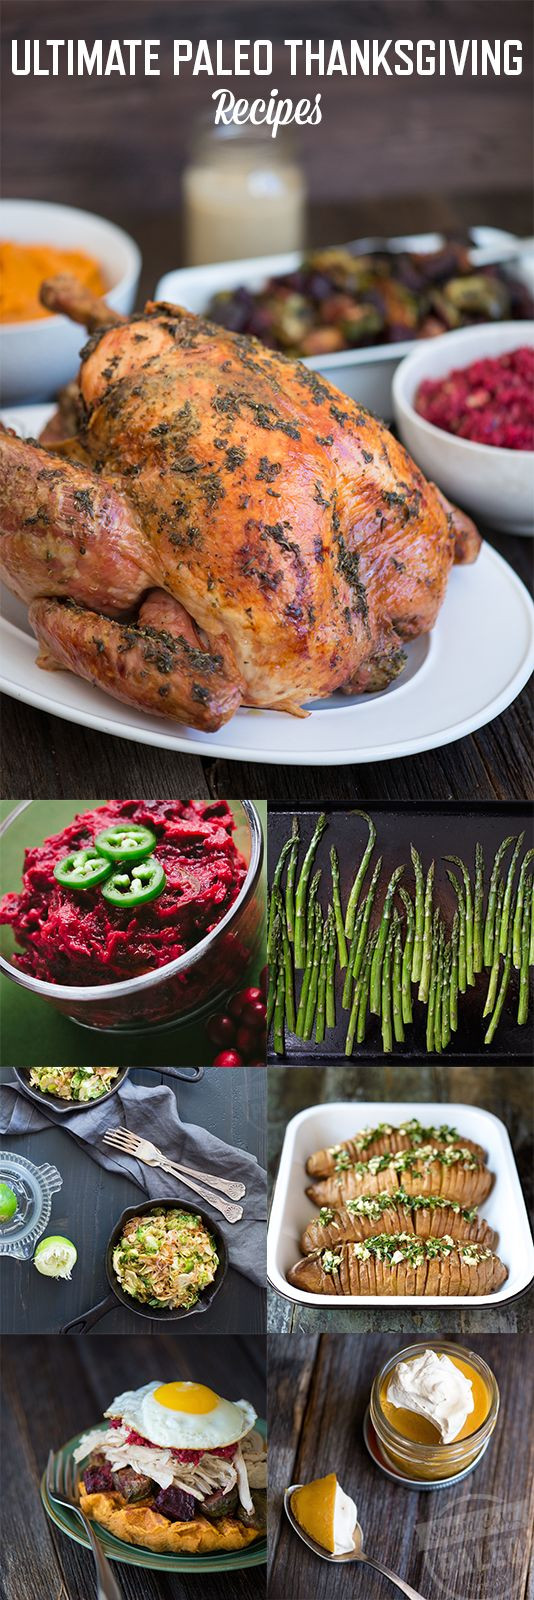 Paleo Thanksgiving Recipes
 17 Best ideas about Paleo Thanksgiving on Pinterest